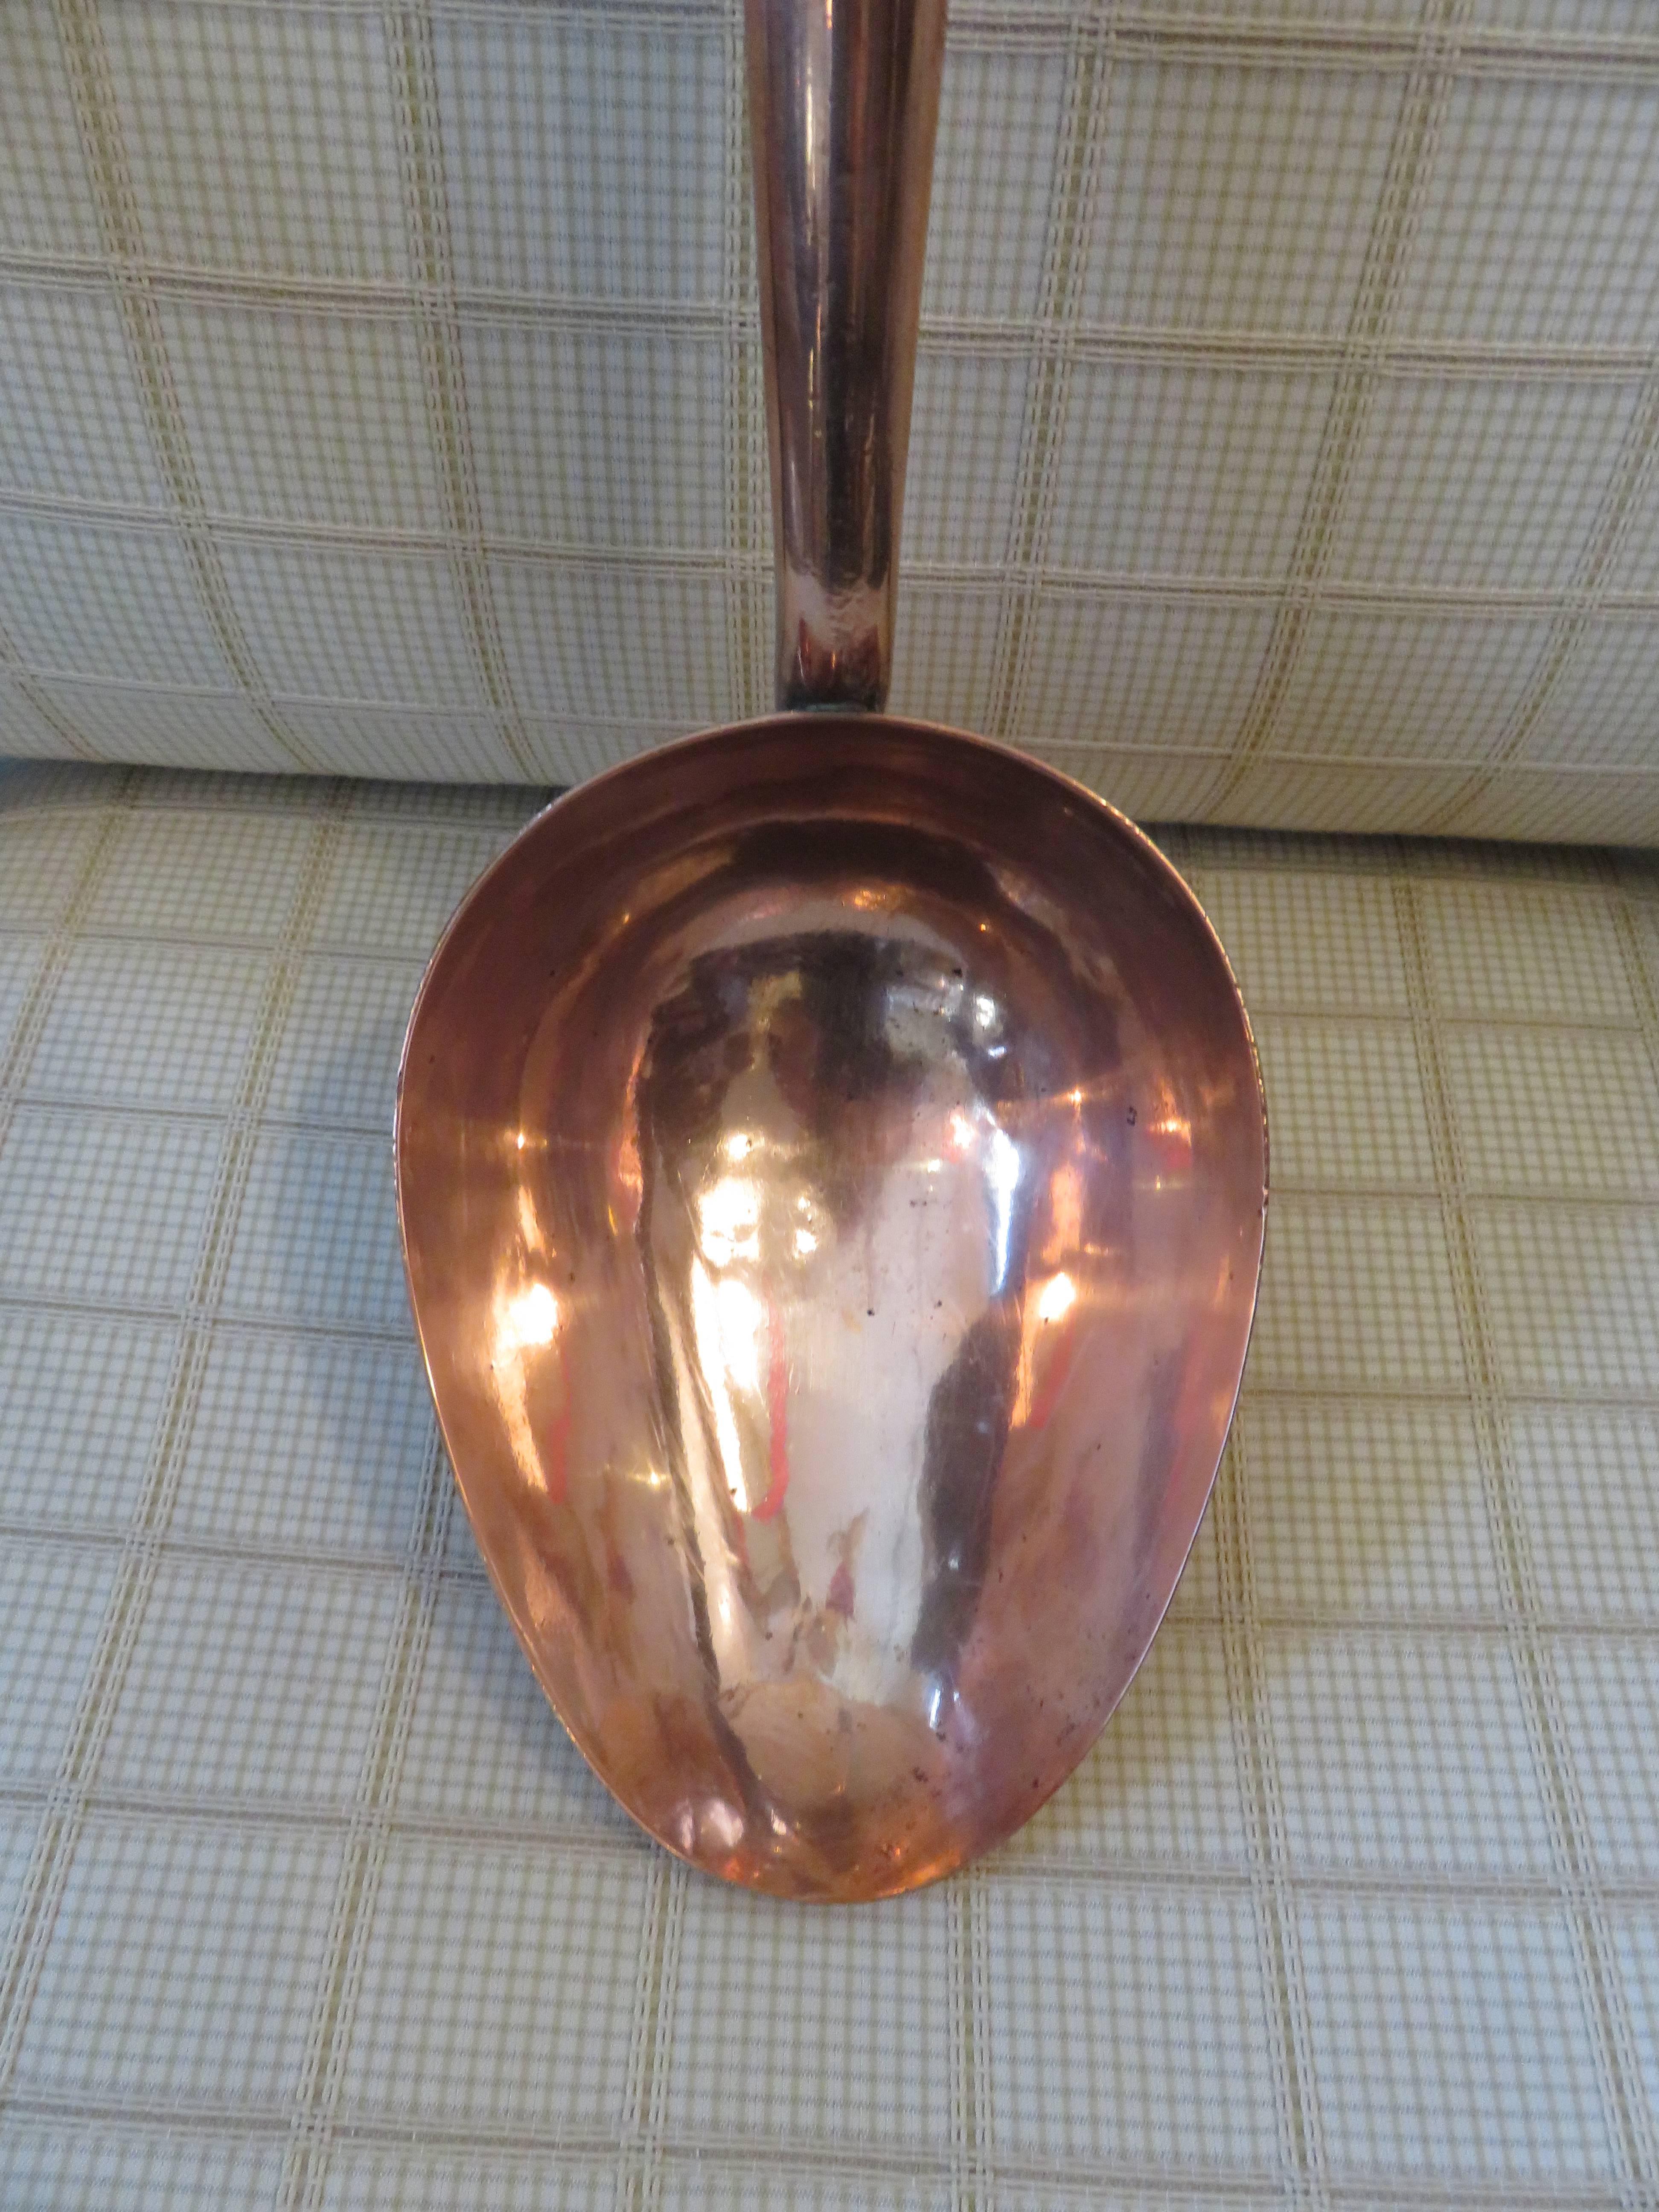 A rare oversized solid copper handcrafted serving spoon. Mahogany wood handles, beautiful condition, circa 1890s, origin England.